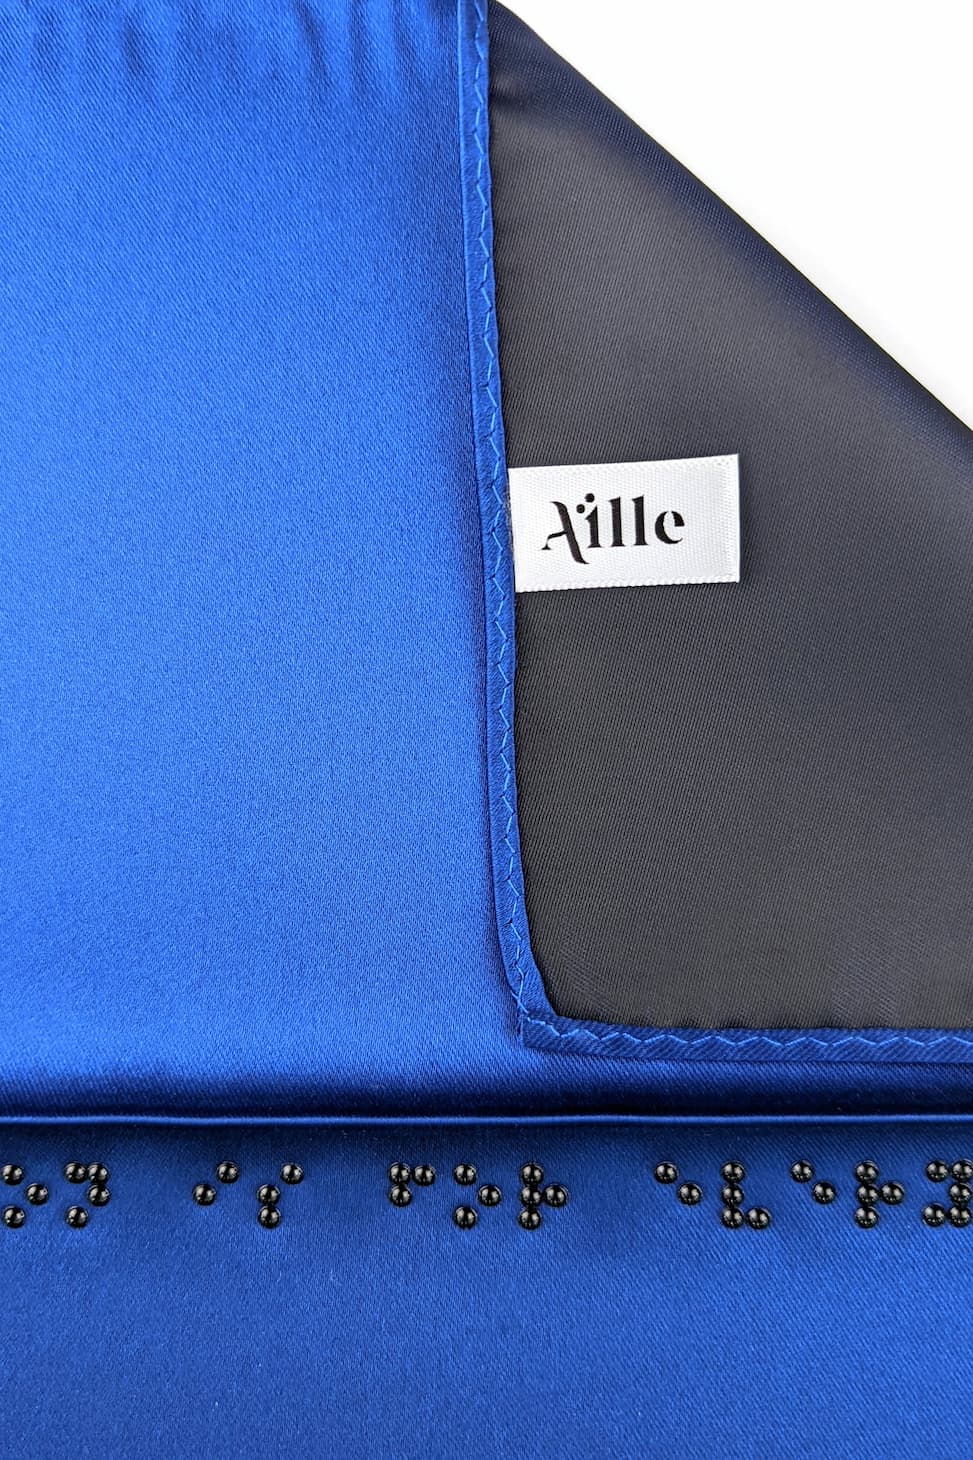 Detail photo of blue pocket square with black braille. White Aille Design tag on reverse side.